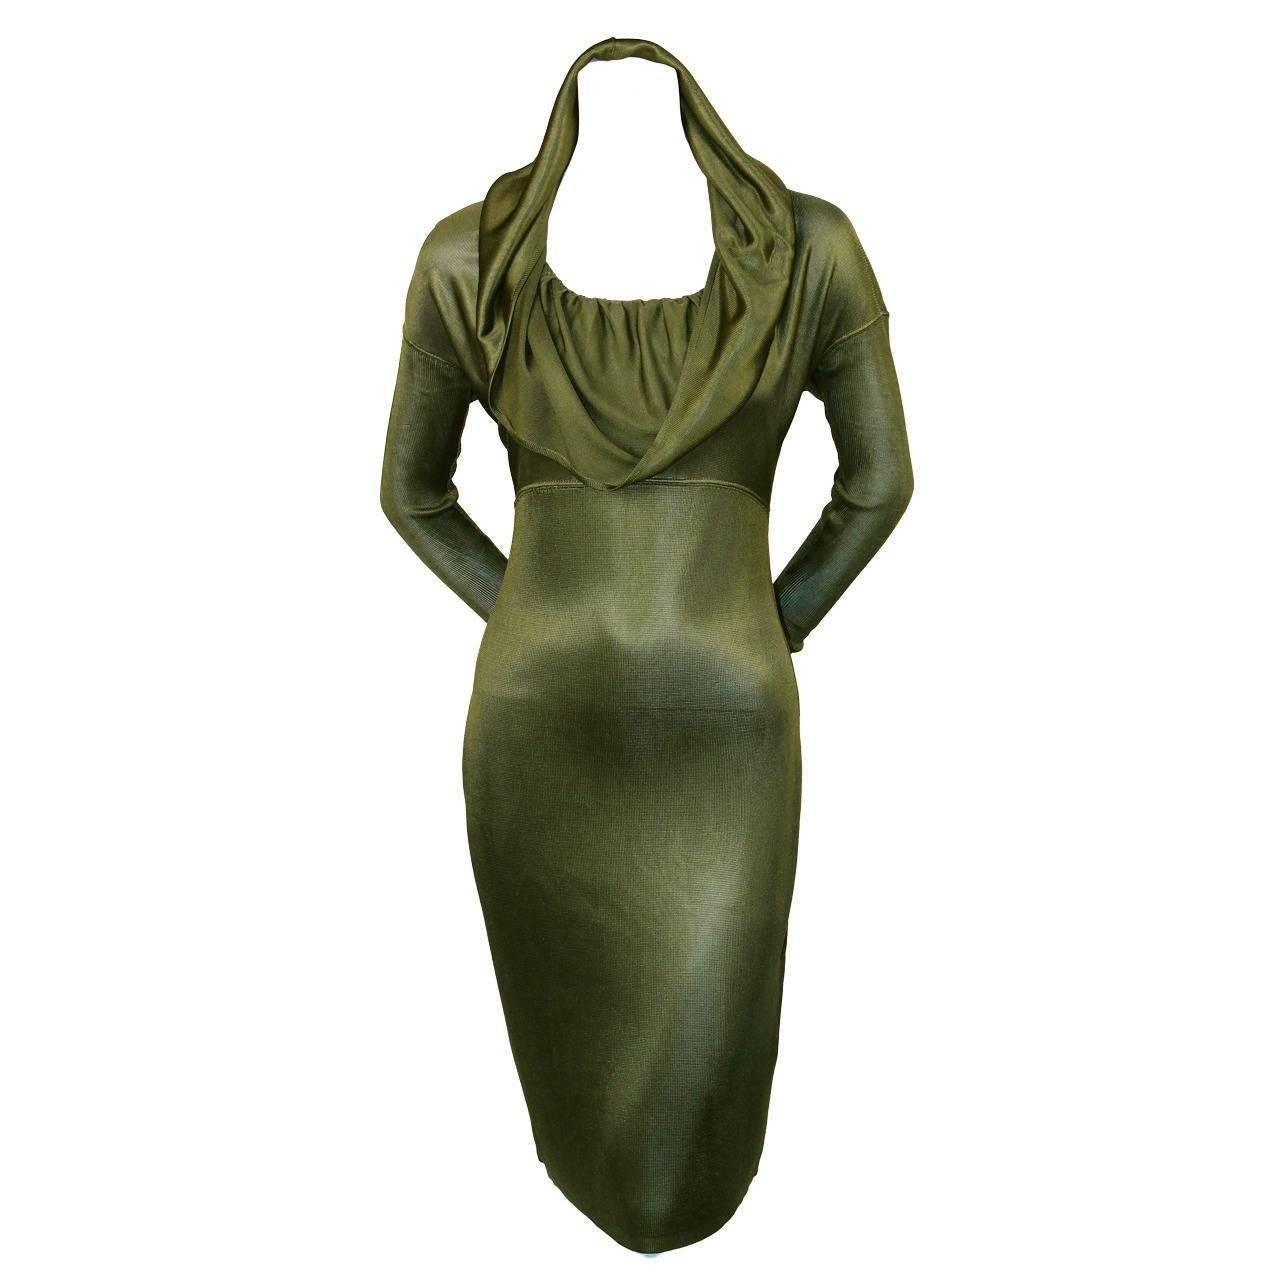 Very rare olive green hooded dress from Azzedine Alaia dating to 1986. 'Hood' can be draped for a more conventional look. Arms are made of a contrasting ribbed wool and are very long and narrow. Best suited for a size small or medium. Approximate